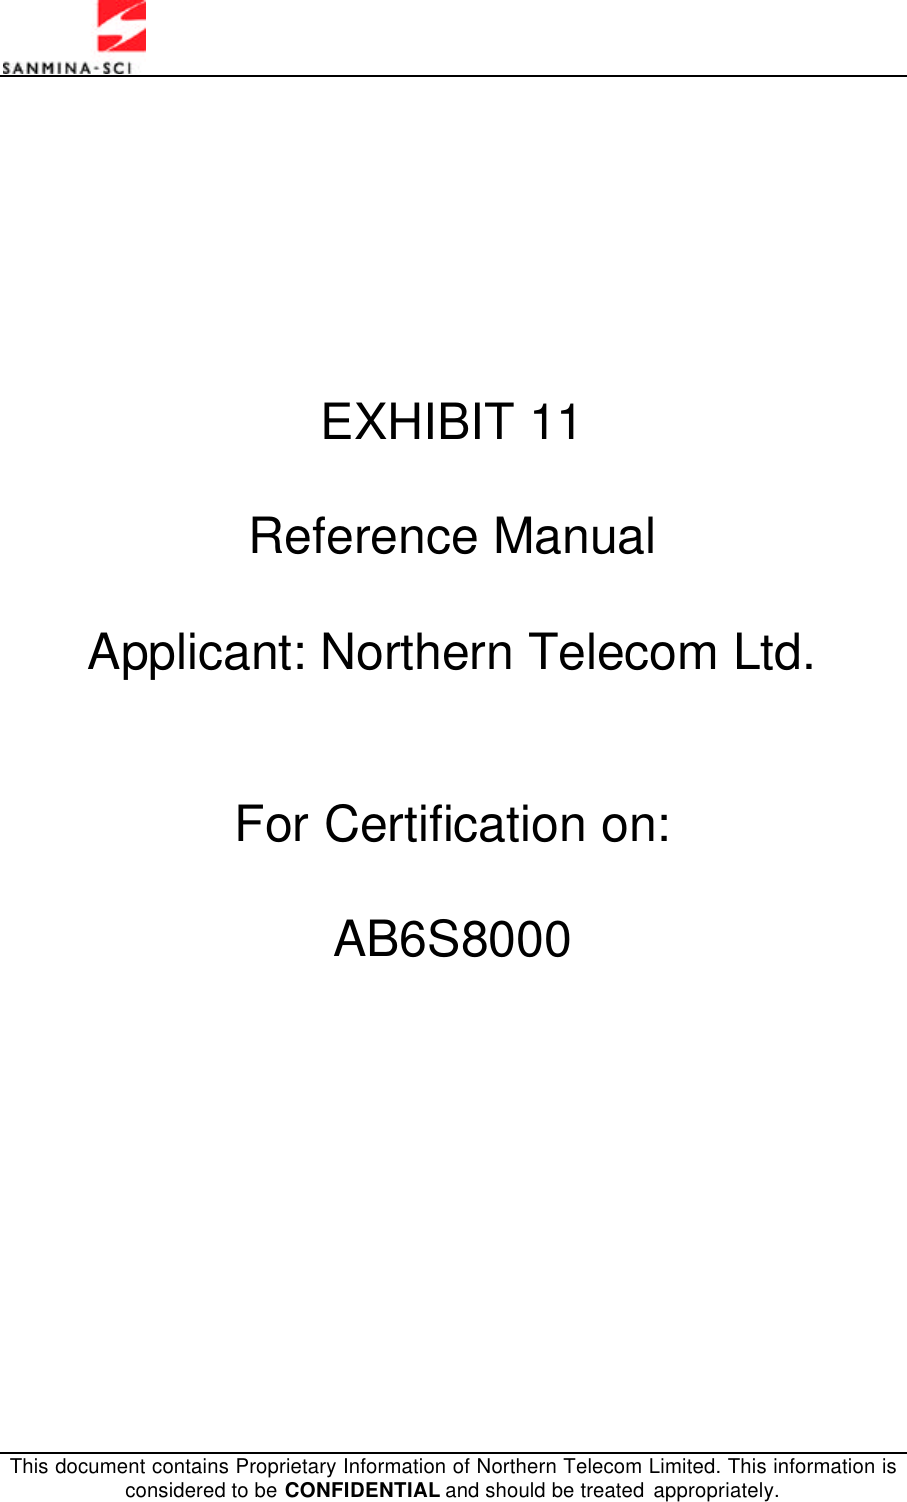    This document contains Proprietary Information of Northern Telecom Limited. This information is considered to be CONFIDENTIAL and should be treated appropriately.      EXHIBIT 11  Reference Manual  Applicant: Northern Telecom Ltd.   For Certification on:  AB6S8000  